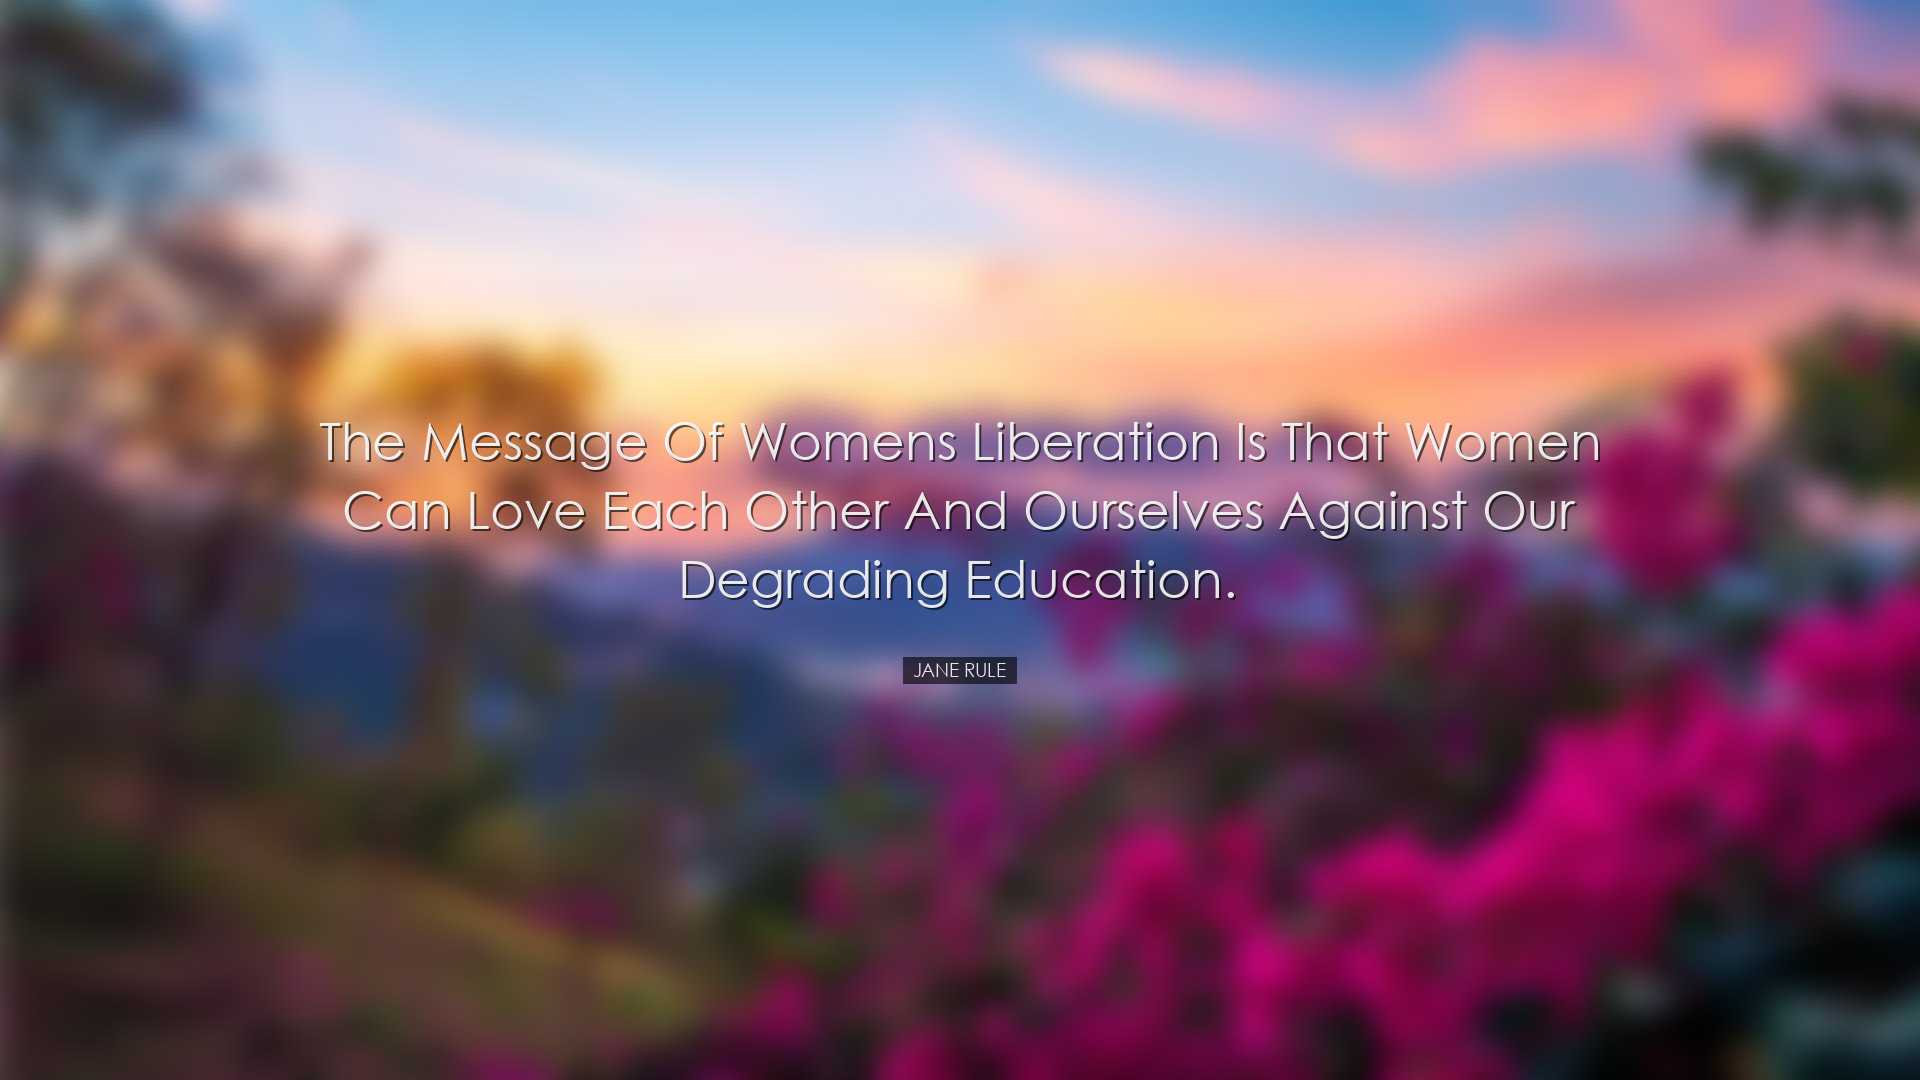 The message of womens liberation is that women can love each other